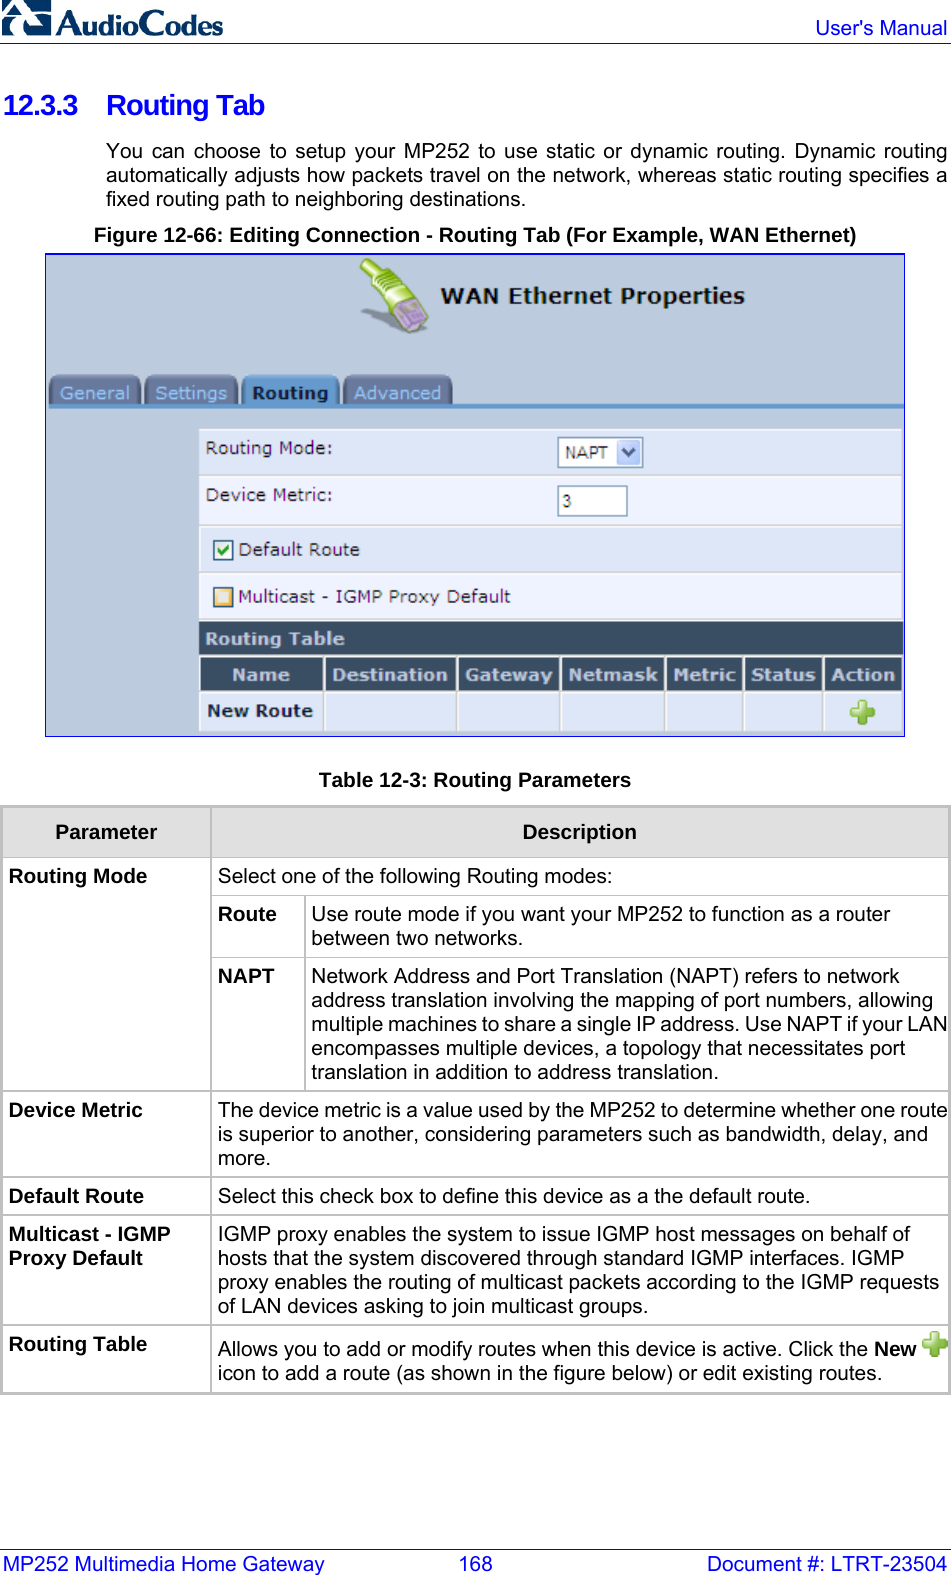 MP252 Multimedia Home Gateway  168  Document #: LTRT-23504  User&apos;s Manual  12.3.3 Routing Tab You can choose to setup your MP252 to use static or dynamic routing. Dynamic routing automatically adjusts how packets travel on the network, whereas static routing specifies a fixed routing path to neighboring destinations. Figure 12-66: Editing Connection - Routing Tab (For Example, WAN Ethernet)  Table 12-3: Routing Parameters Parameter  Description Select one of the following Routing modes: Route  Use route mode if you want your MP252 to function as a router between two networks. Routing Mode NAPT  Network Address and Port Translation (NAPT) refers to network address translation involving the mapping of port numbers, allowing multiple machines to share a single IP address. Use NAPT if your LANencompasses multiple devices, a topology that necessitates port translation in addition to address translation. Device Metric  The device metric is a value used by the MP252 to determine whether one routeis superior to another, considering parameters such as bandwidth, delay, and more. Default Route  Select this check box to define this device as a the default route. Multicast - IGMP Proxy Default IGMP proxy enables the system to issue IGMP host messages on behalf of hosts that the system discovered through standard IGMP interfaces. IGMP proxy enables the routing of multicast packets according to the IGMP requests of LAN devices asking to join multicast groups. Routing Table  Allows you to add or modify routes when this device is active. Click the New icon to add a route (as shown in the figure below) or edit existing routes.   